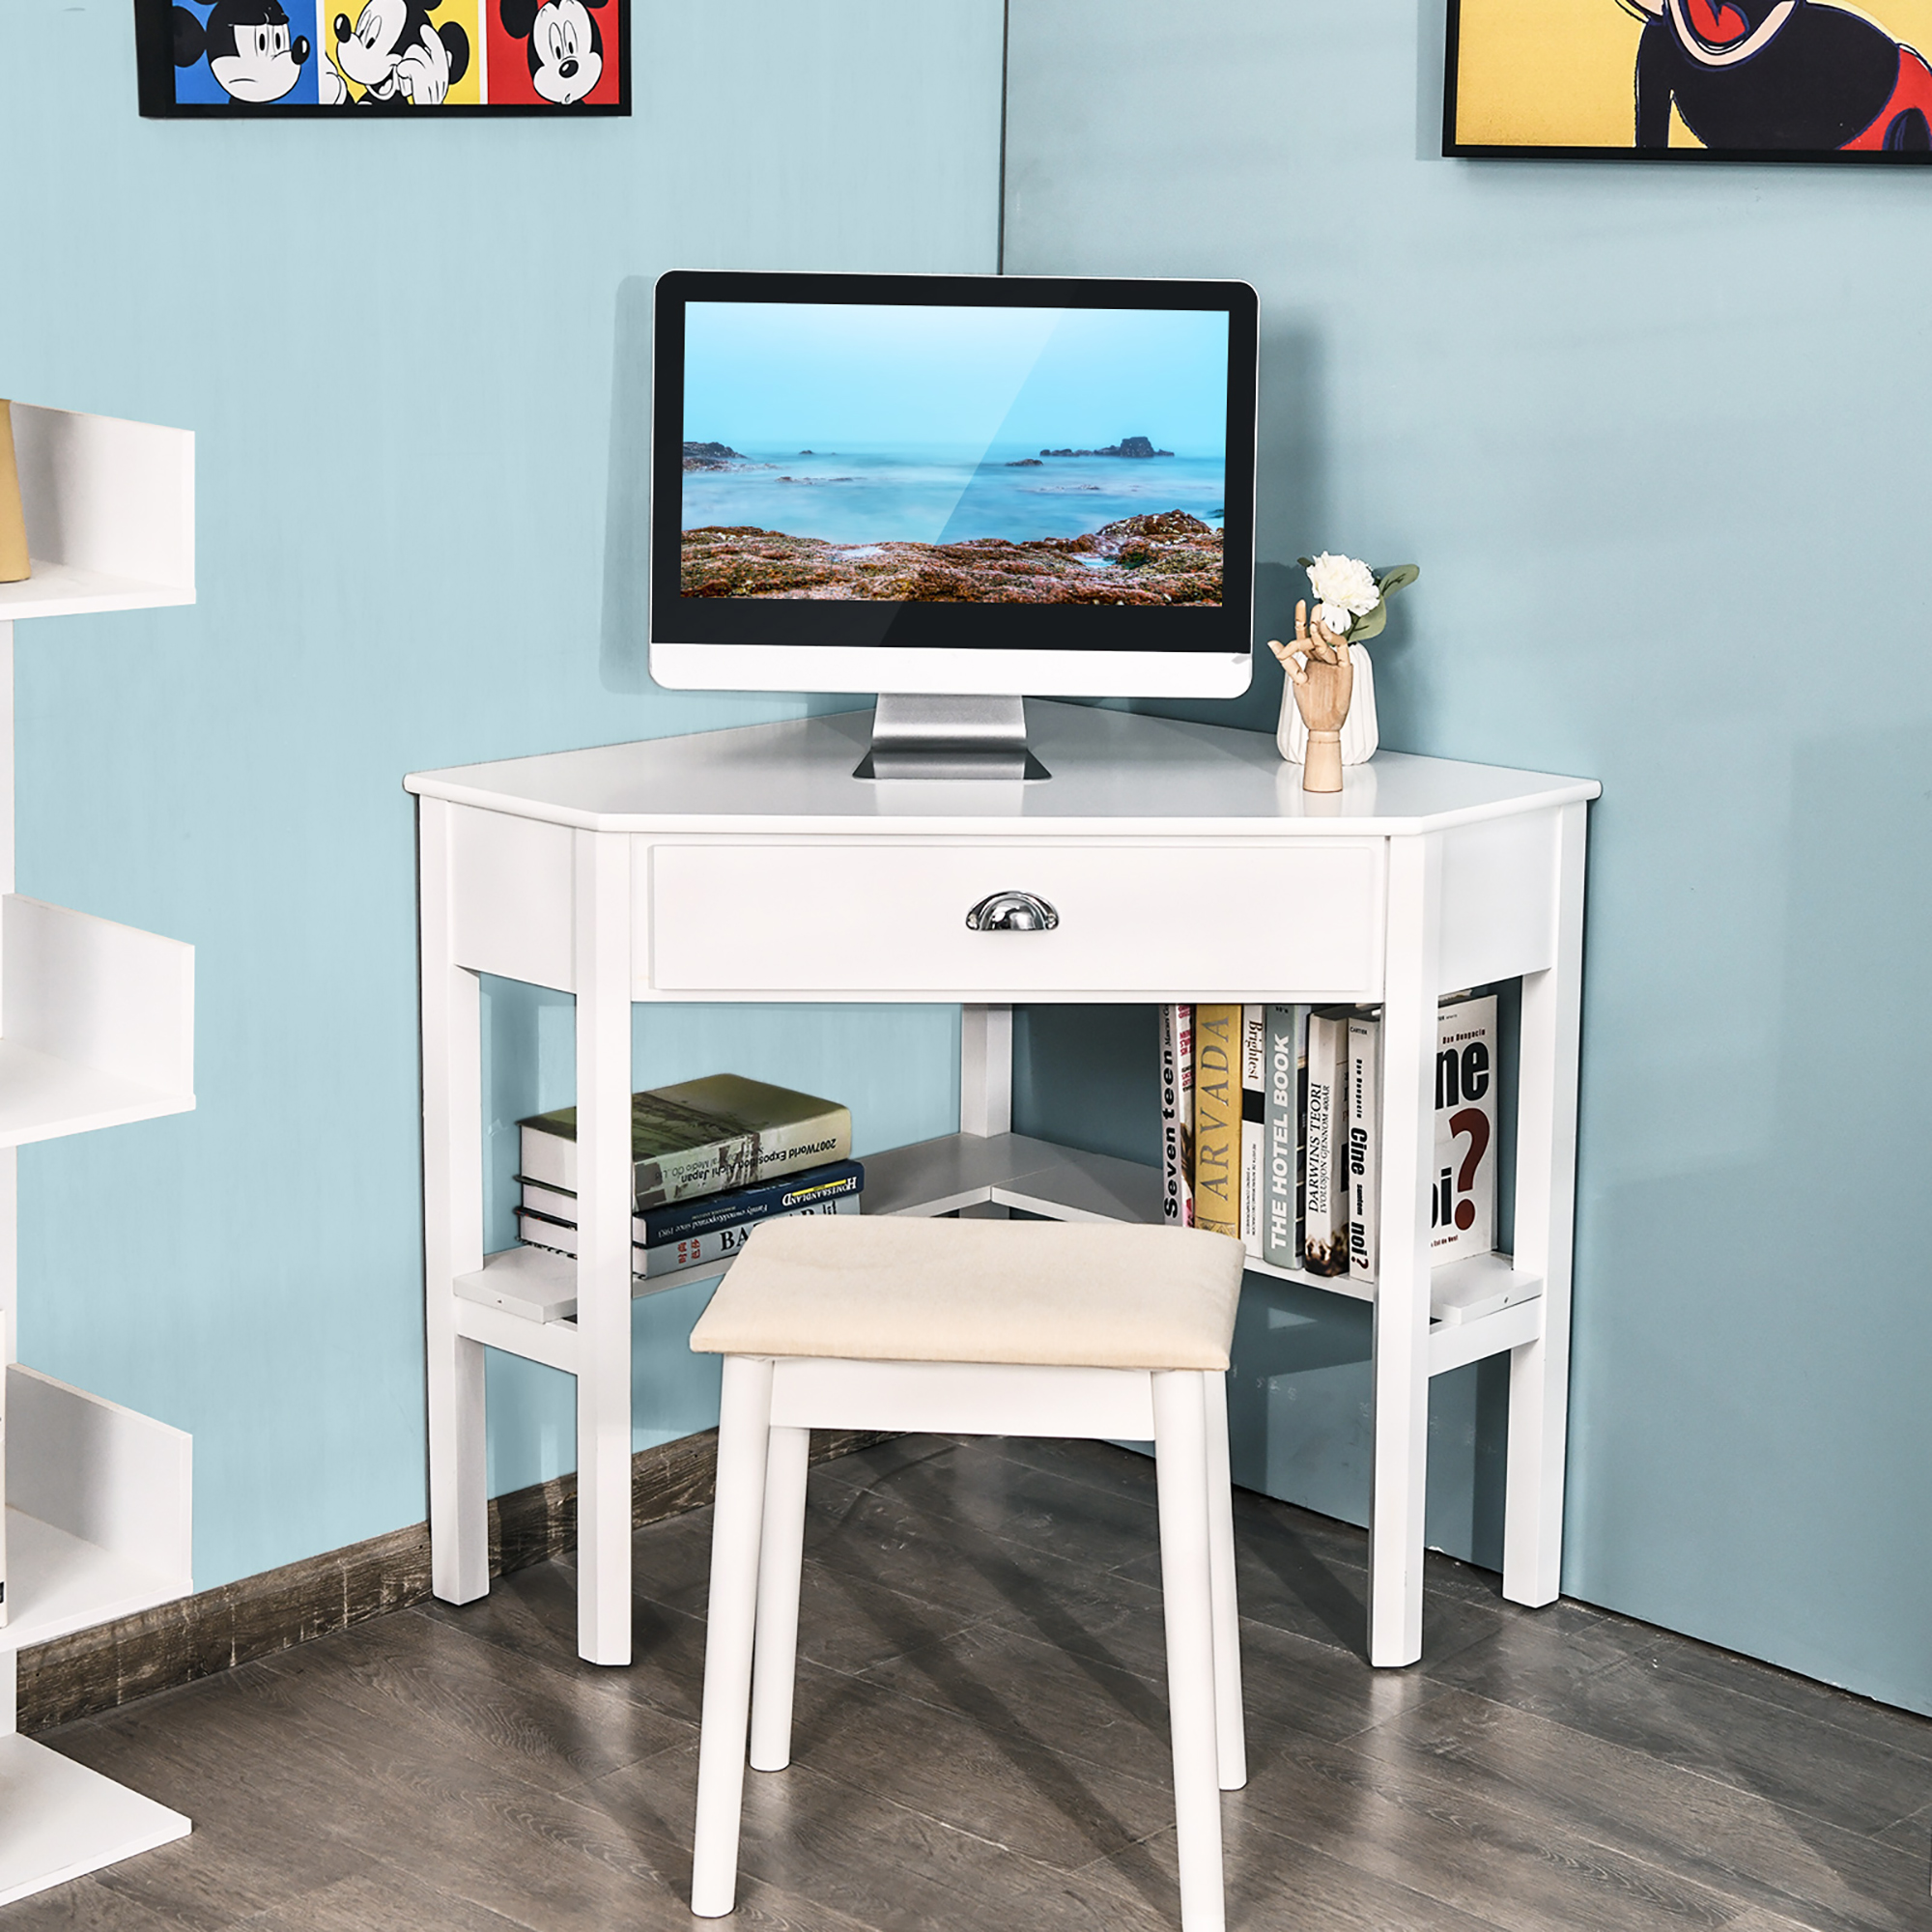 Costway Triangle Computer Desk Corner Office Desk Laptop Table w/ Drawer Shelves Rustic White - image 2 of 10